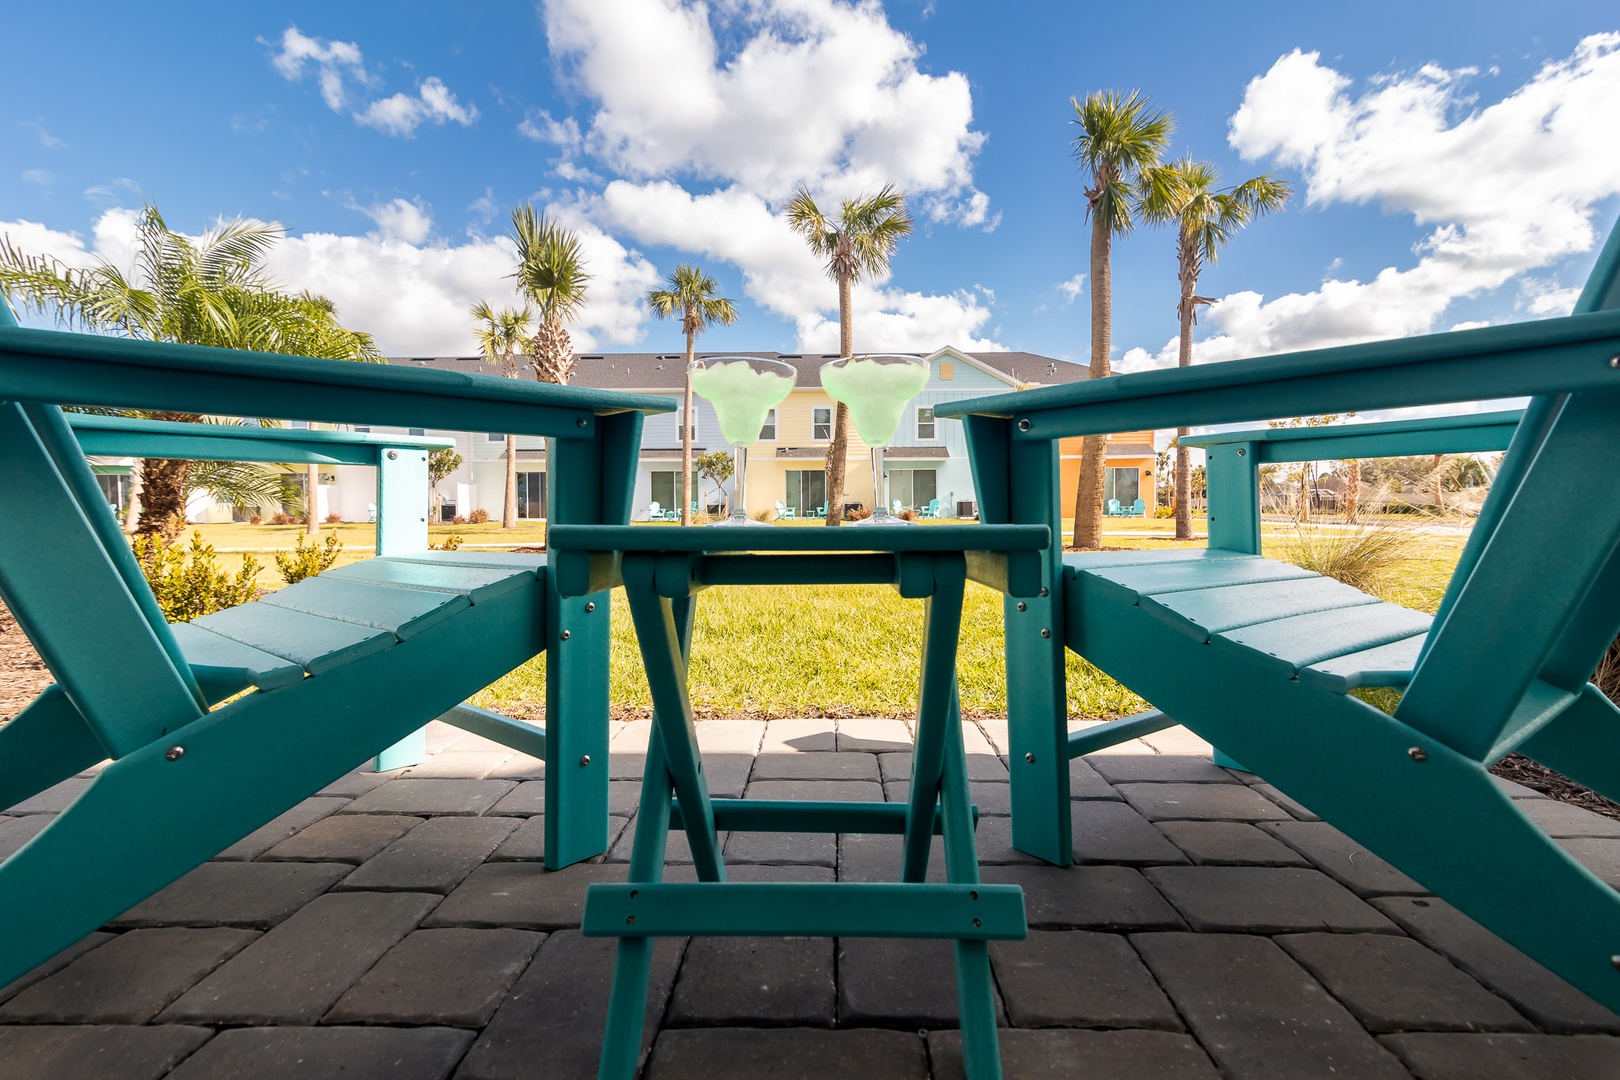 Take in the breeze and unwind at Blue Sky Hideaway